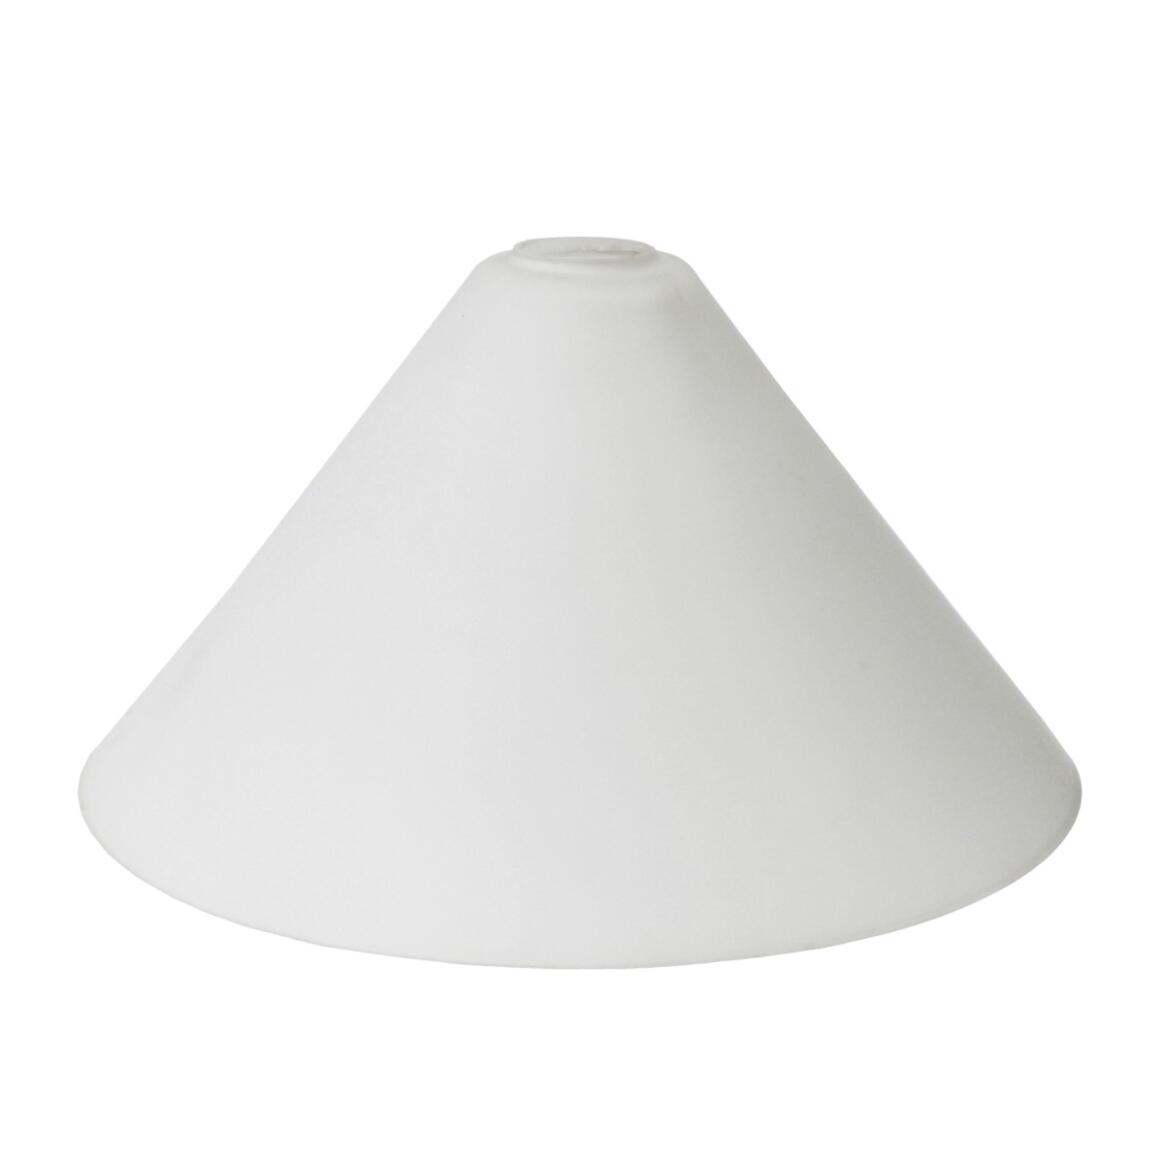 Opal cone pool table glass lamp shade main product image